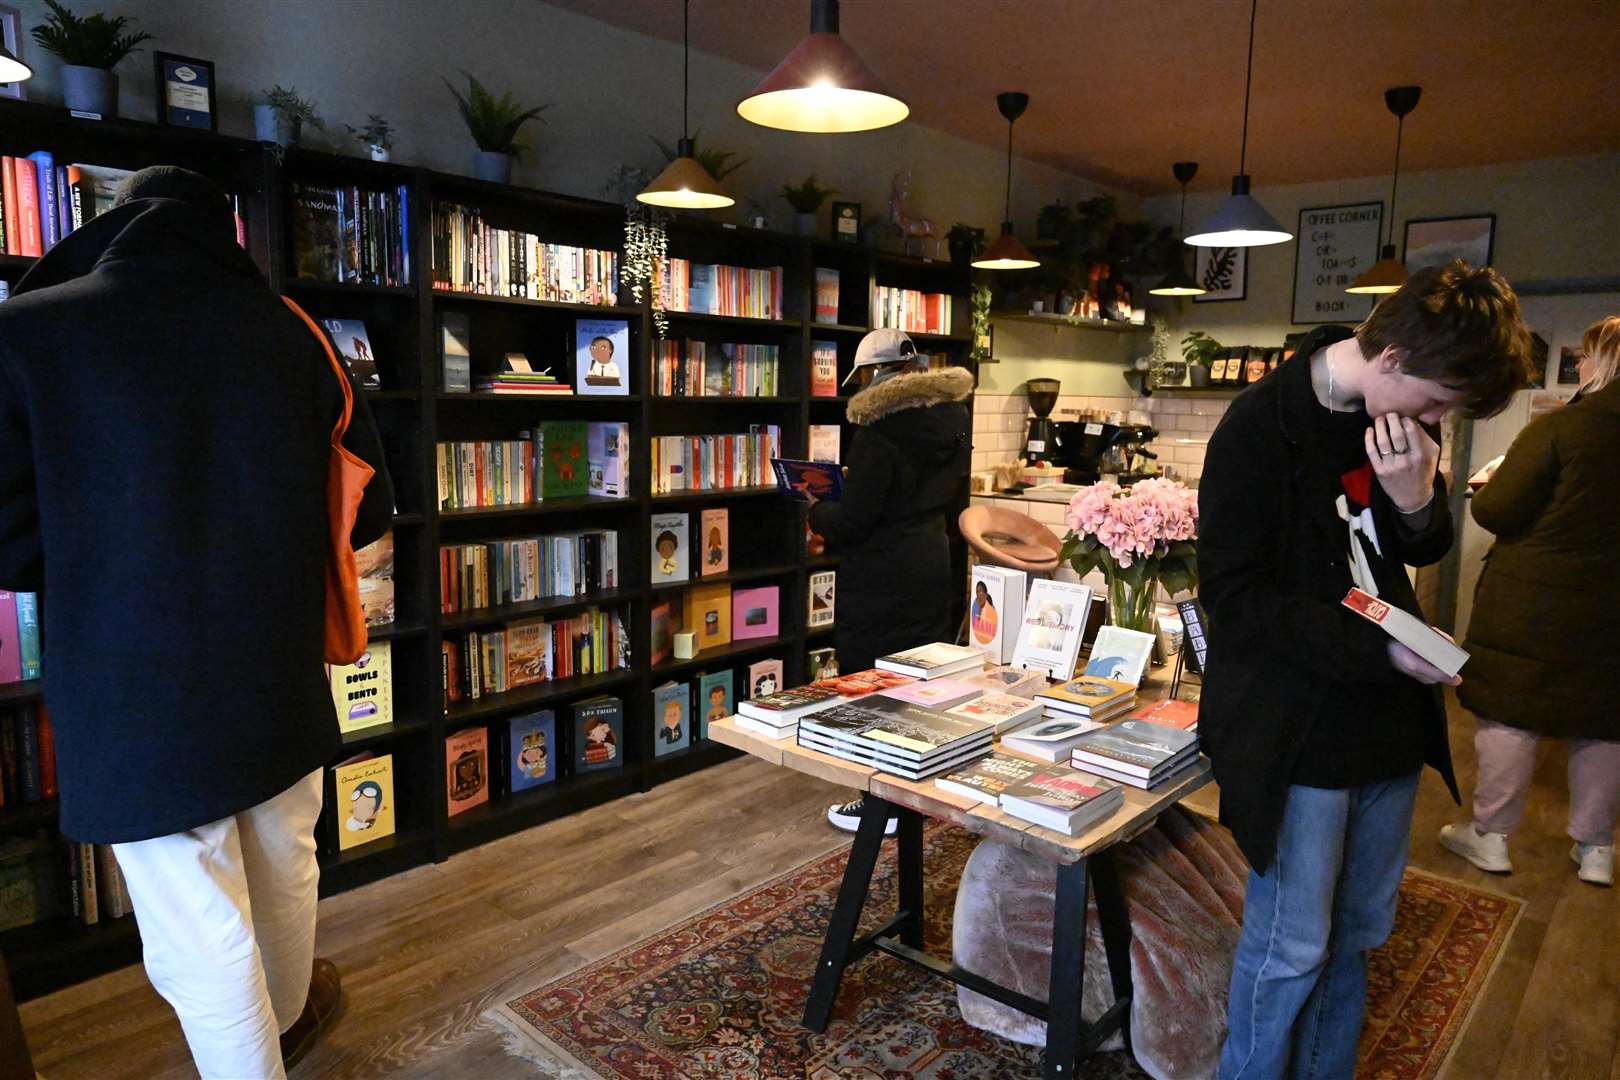 Customers search through the book shelves in support of the shop. Picture: Barry Goodwin